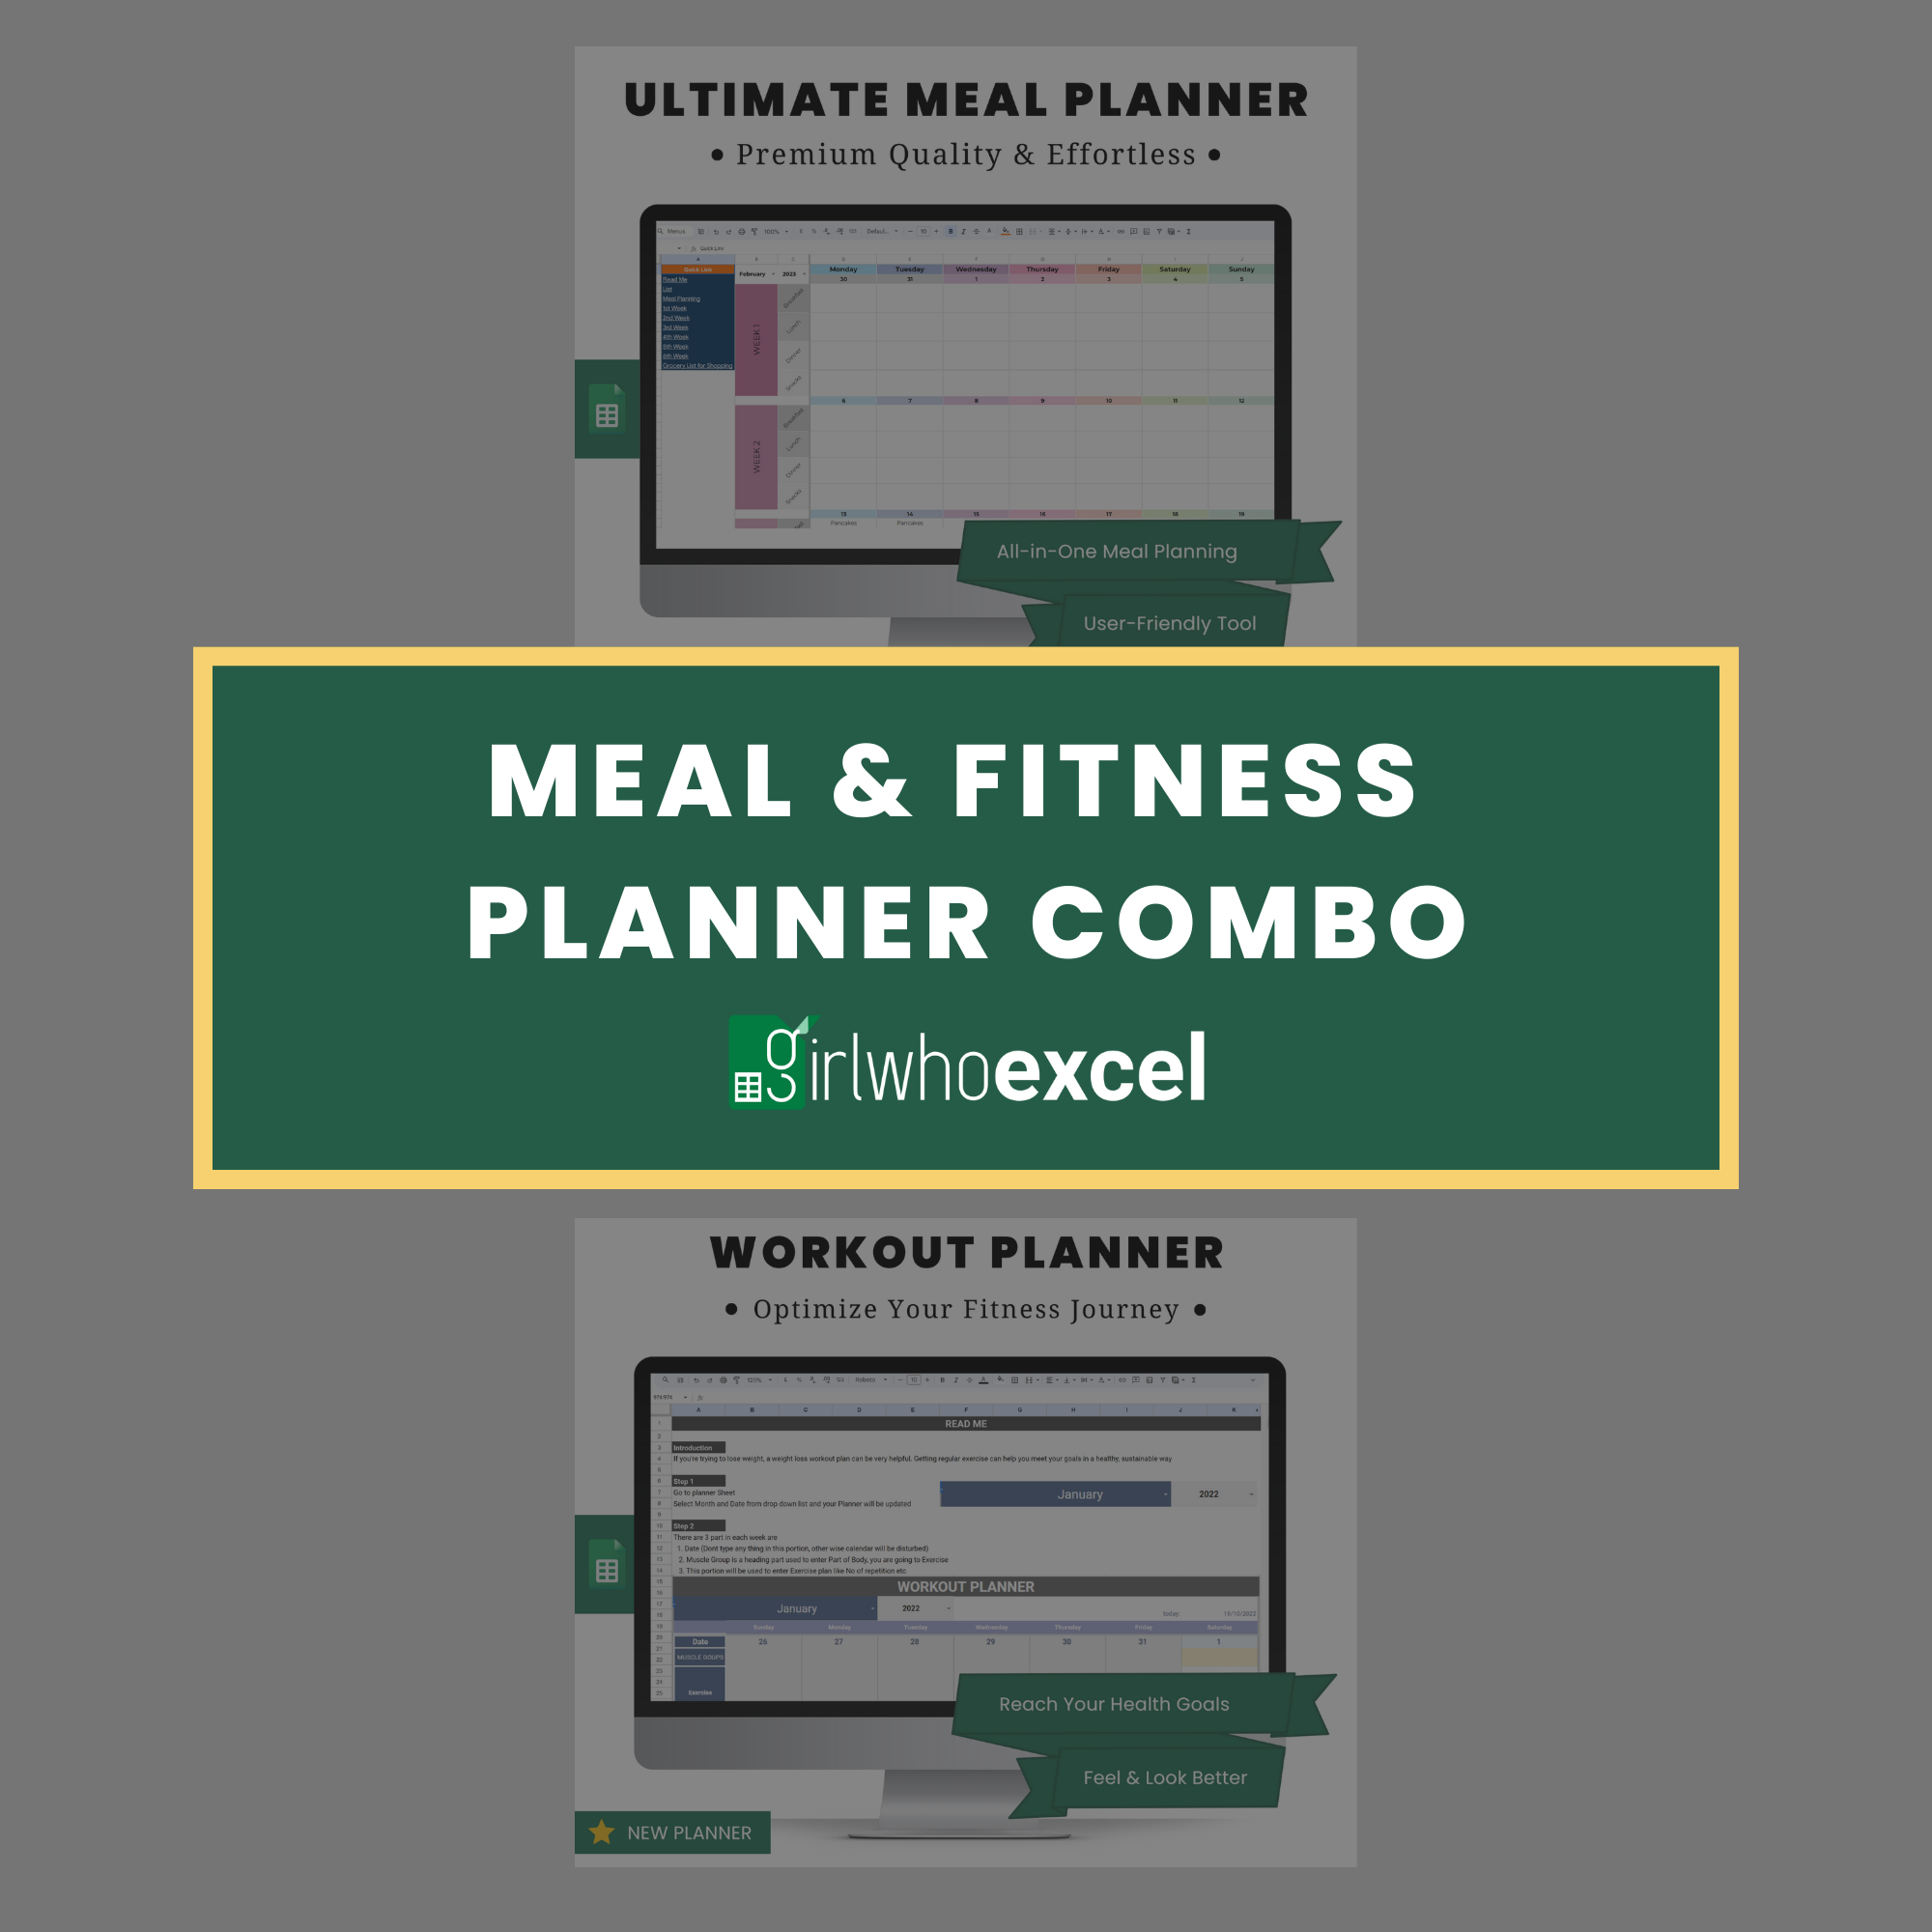 Meal & Fitness Planner Combo